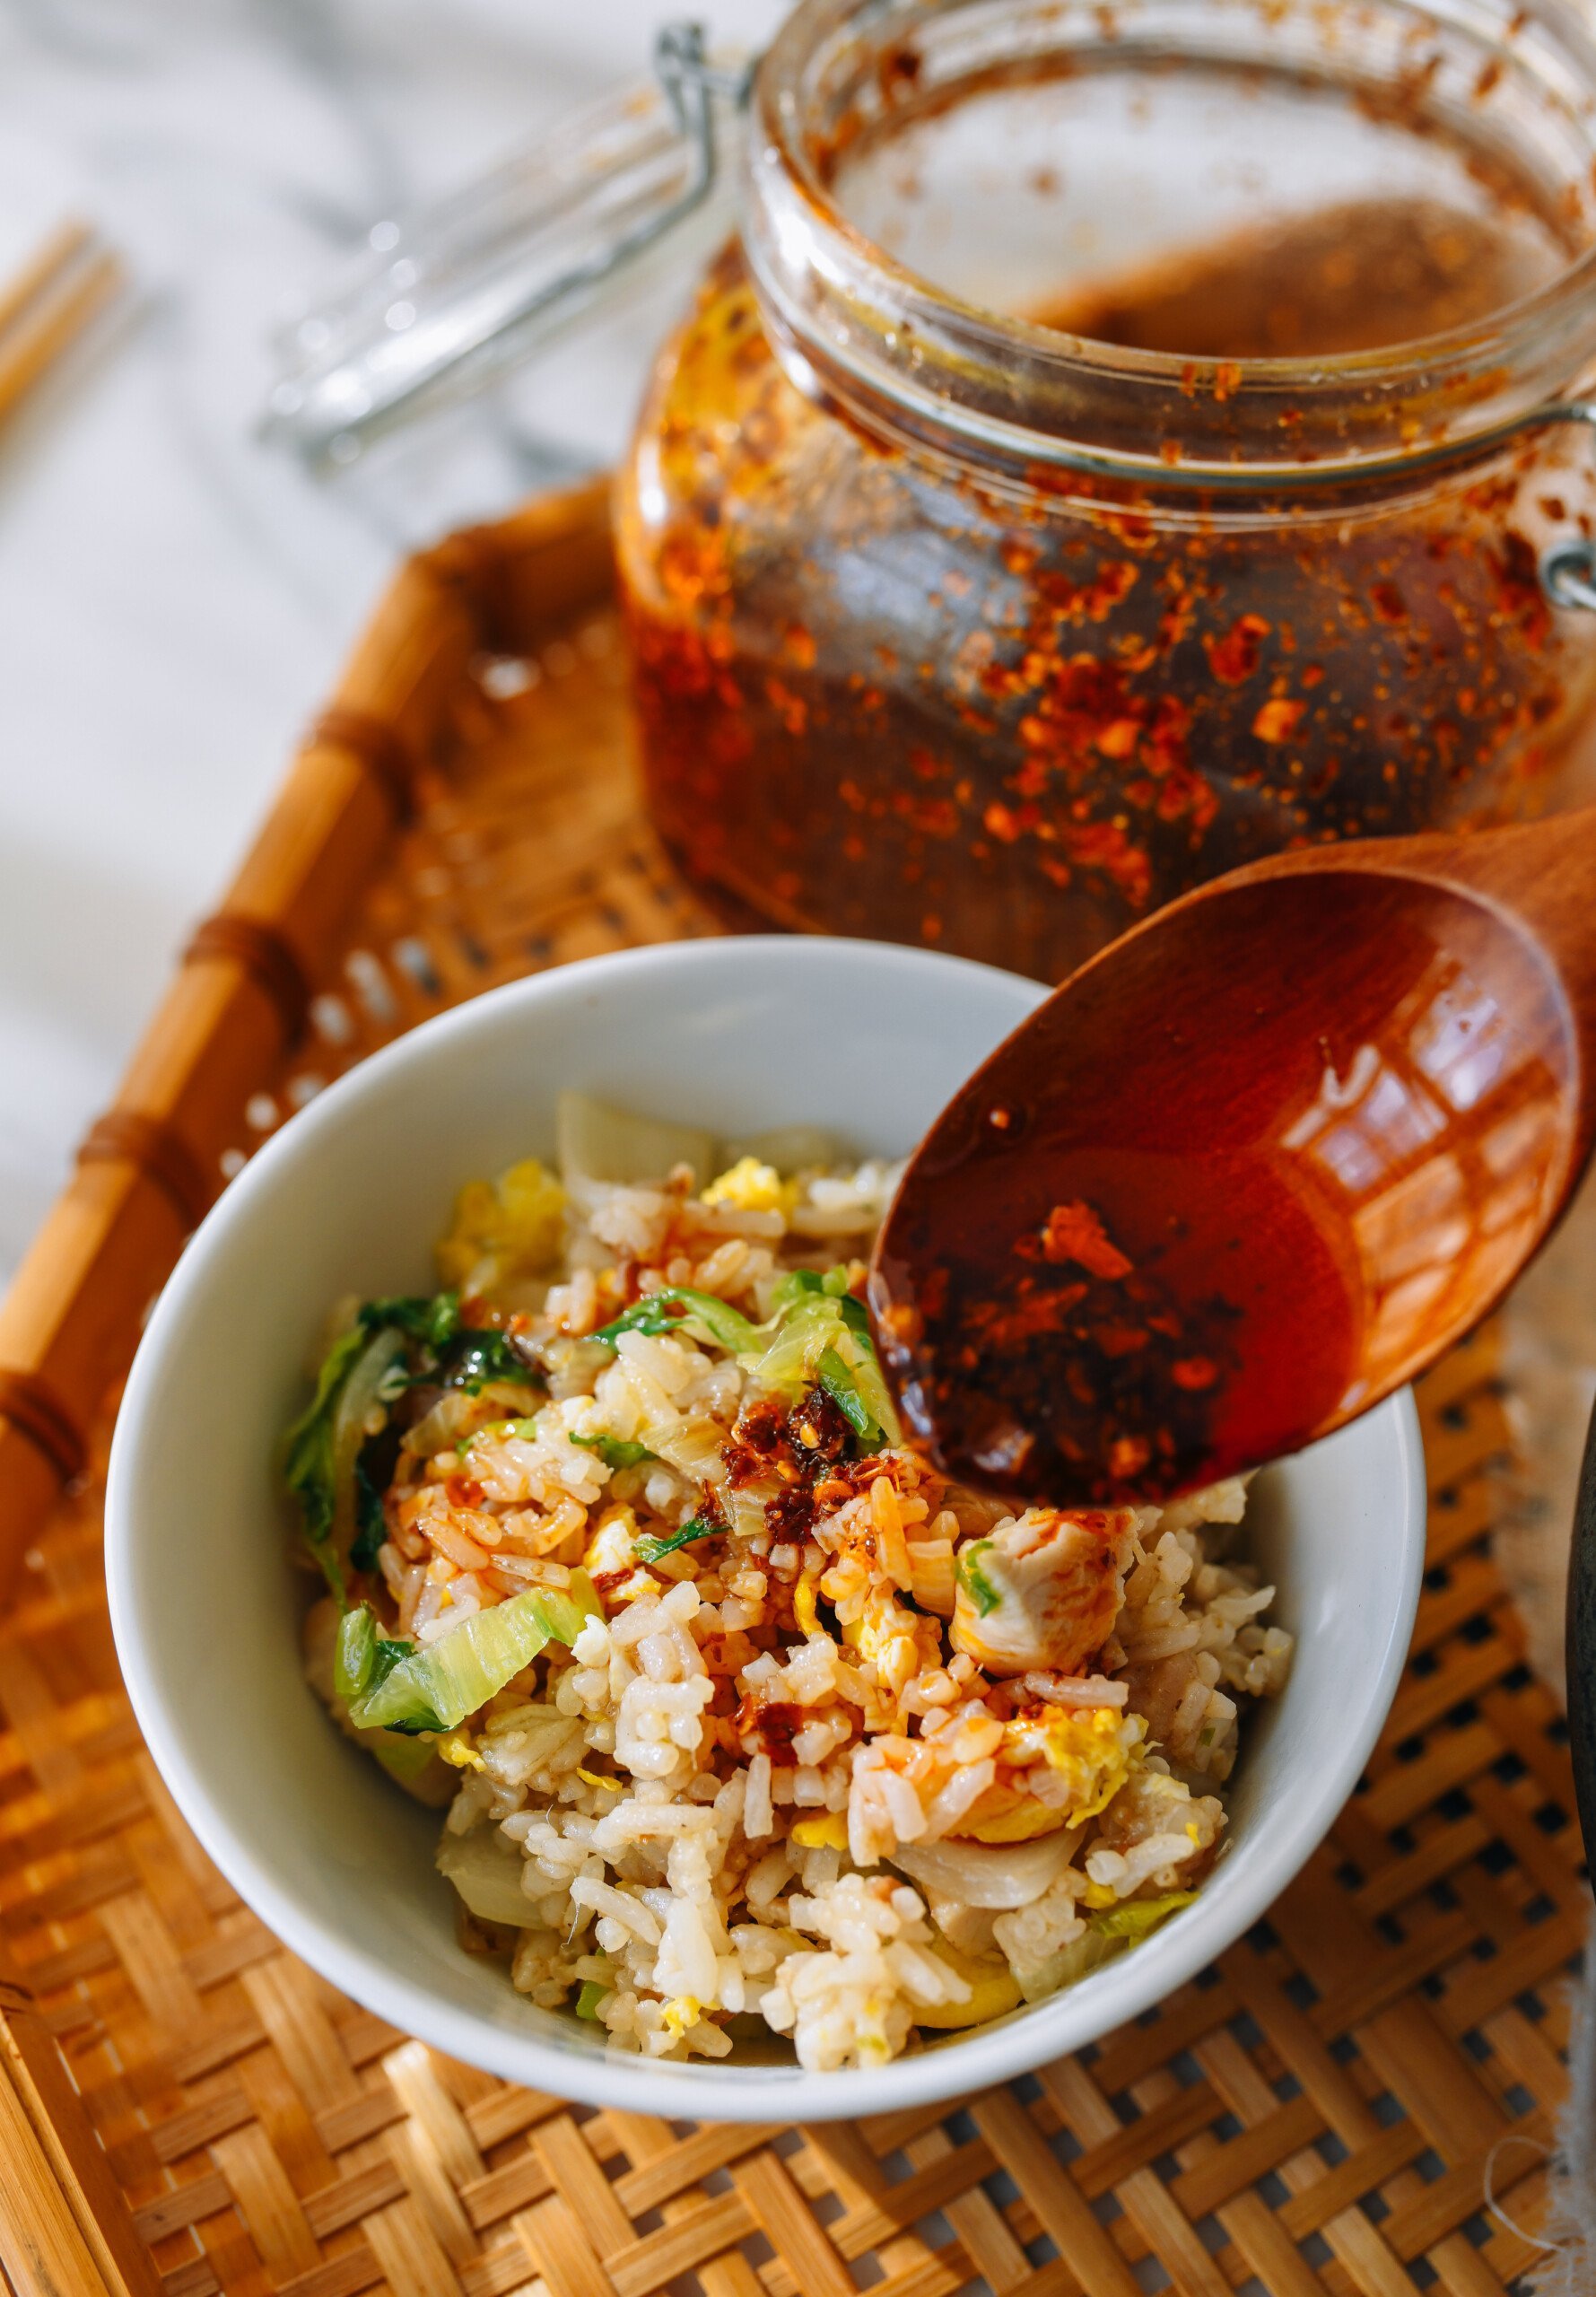 Bowl of anchovy fried rice with chili oil